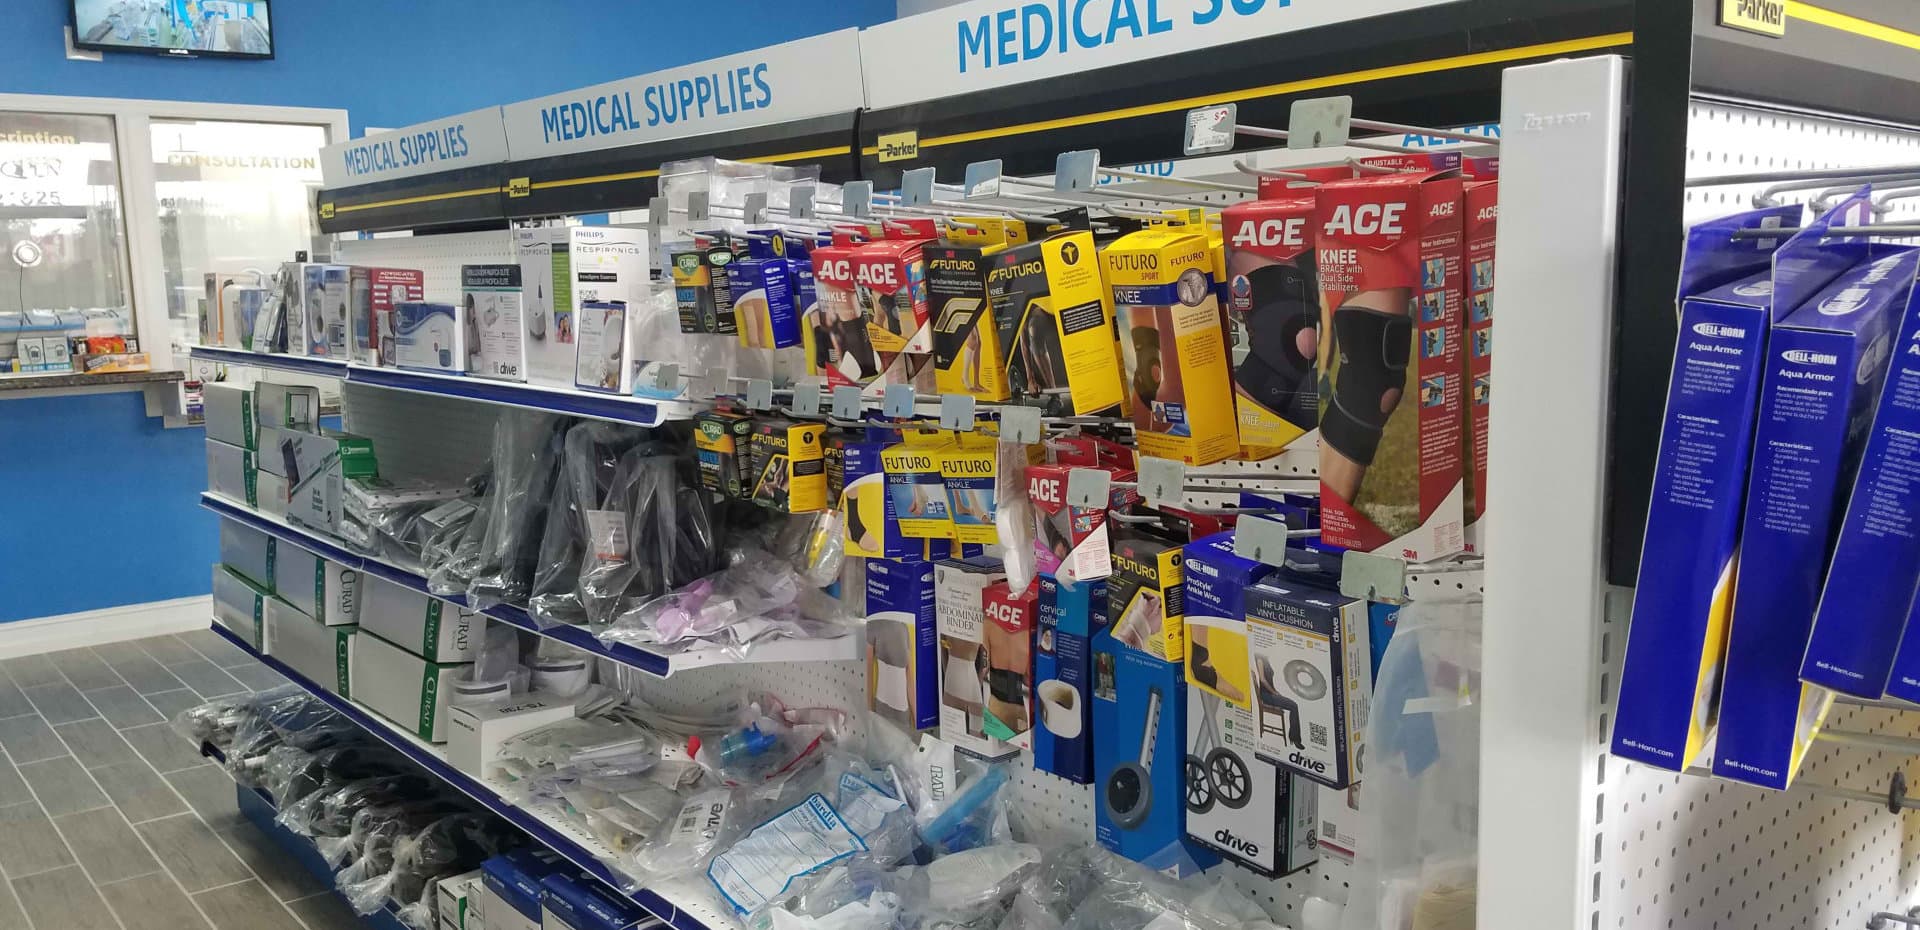 medical supplies in display